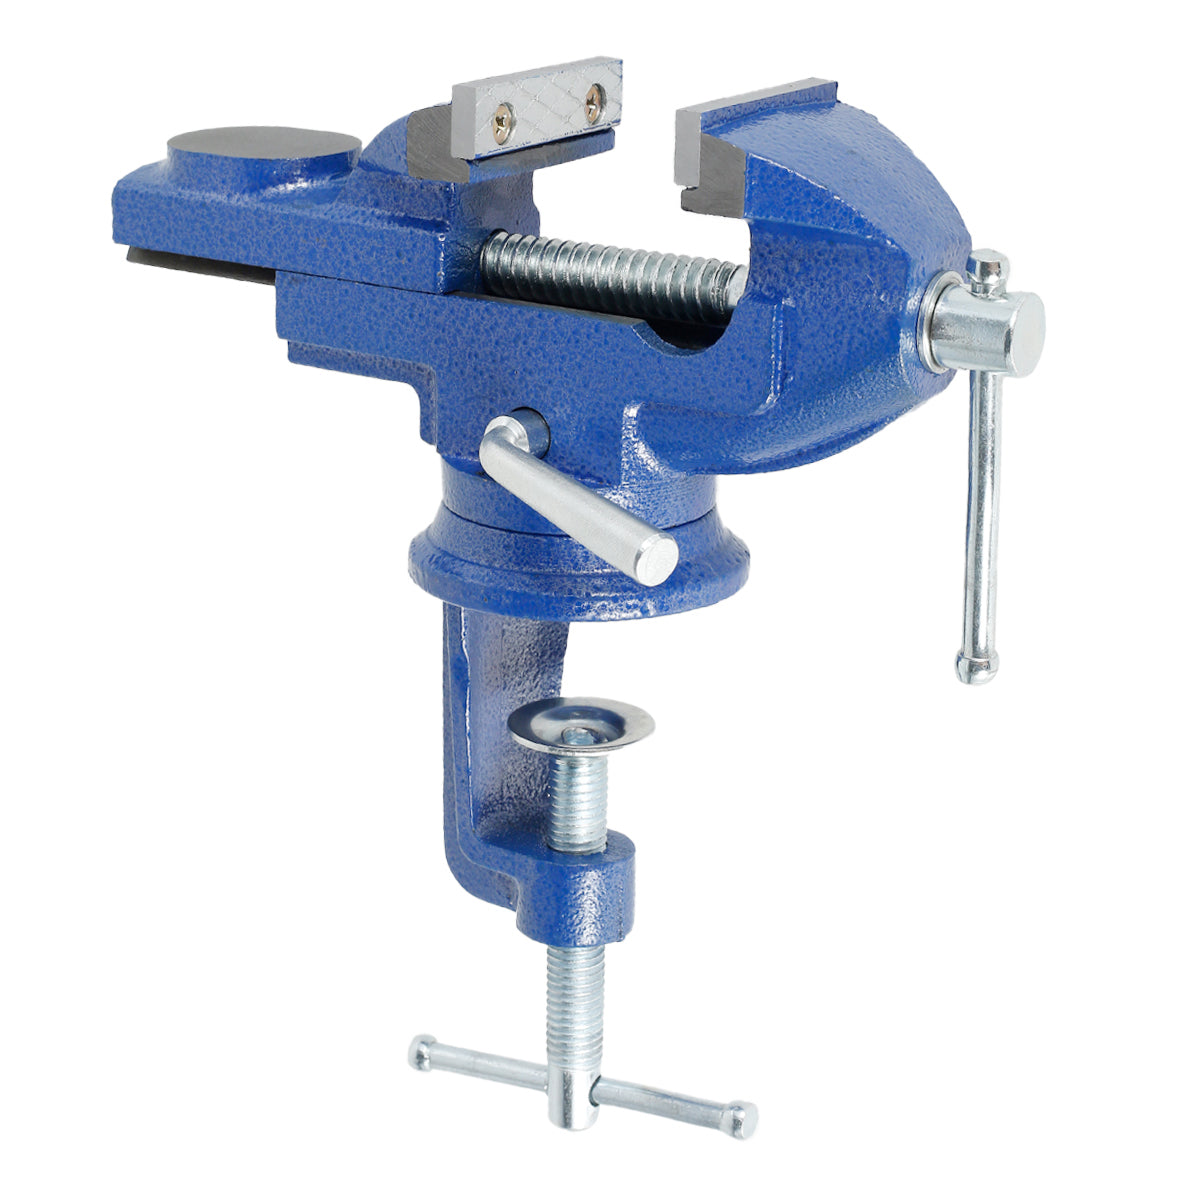 Universal Rotary Table Bench Clamp Woodworking Repair Metallurgical Tool Drill Press  Vise blue ZopiStyle